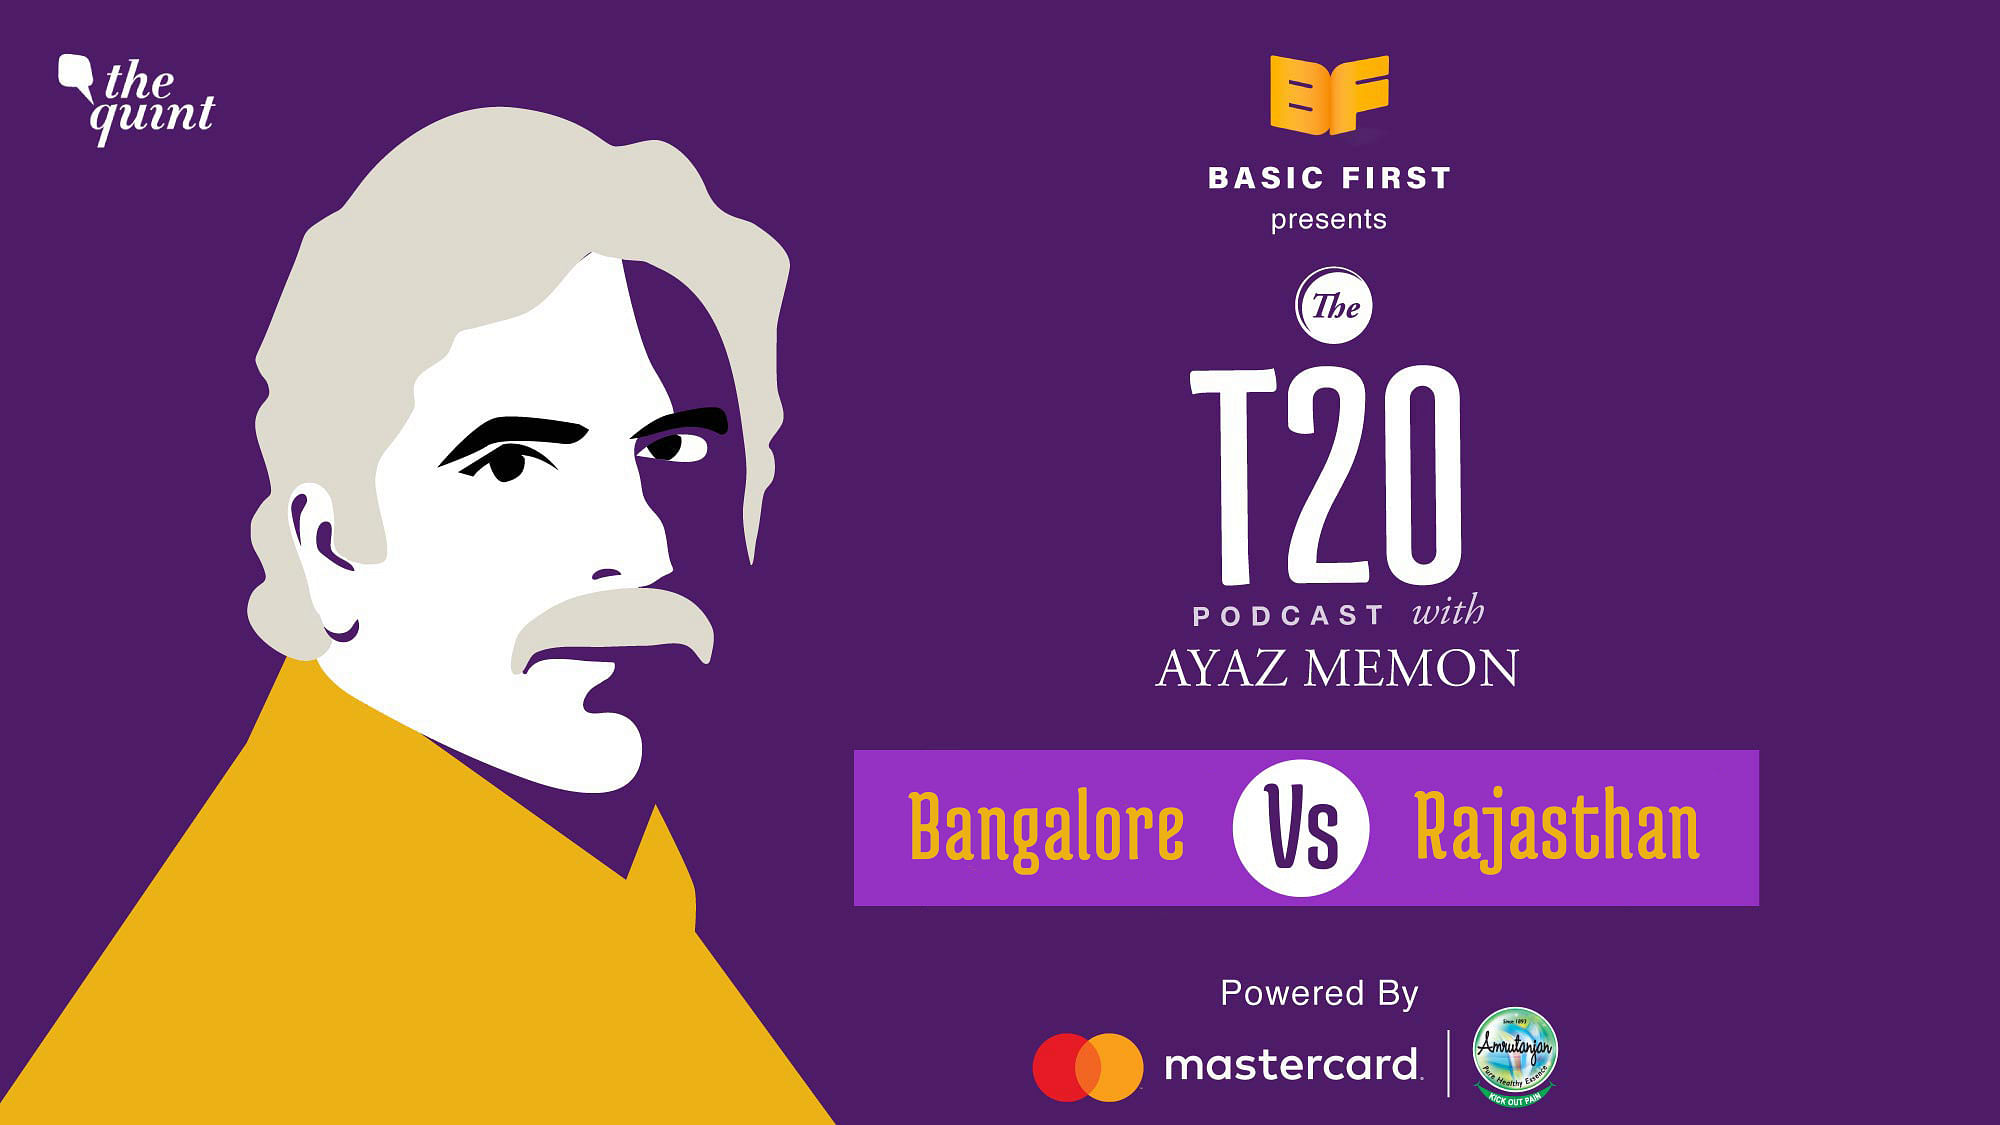 On episode 15 of The T20 Podcast, Ayaz Memon and I talk about Rajasthan’s 8 wicket loss to Virat Kohli’s Bangalore.